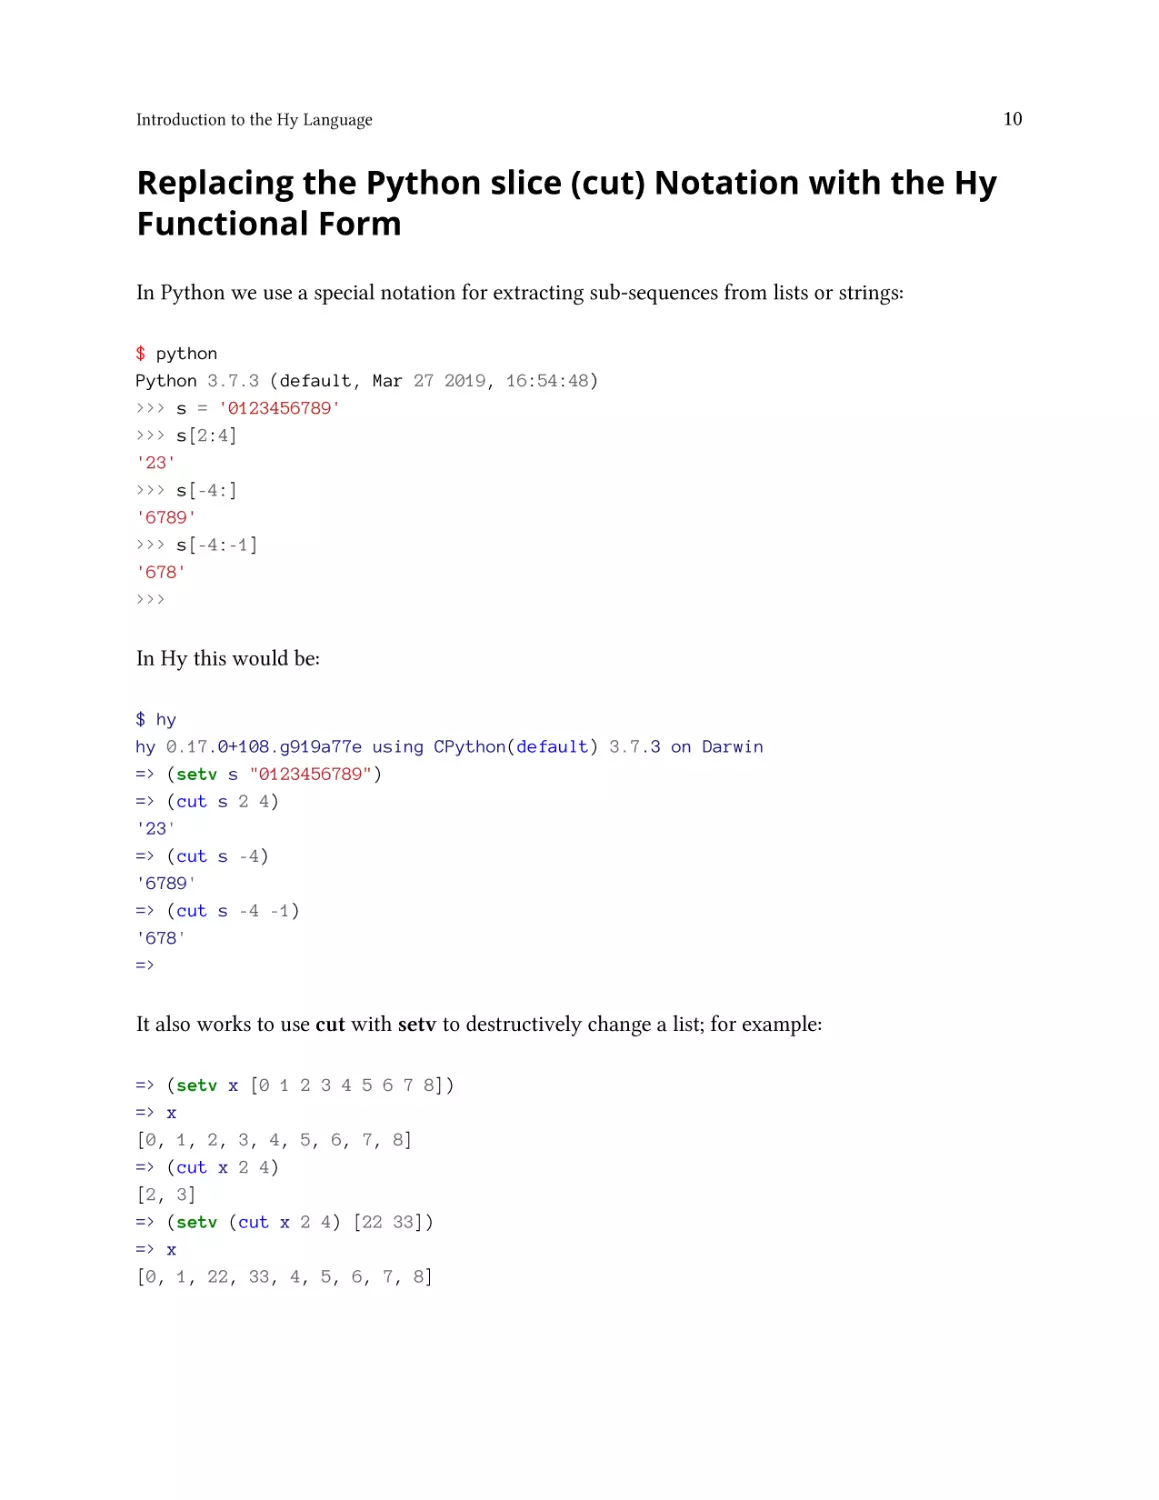 Replacing the Python slice (cut) Notation with the Hy Functional Form